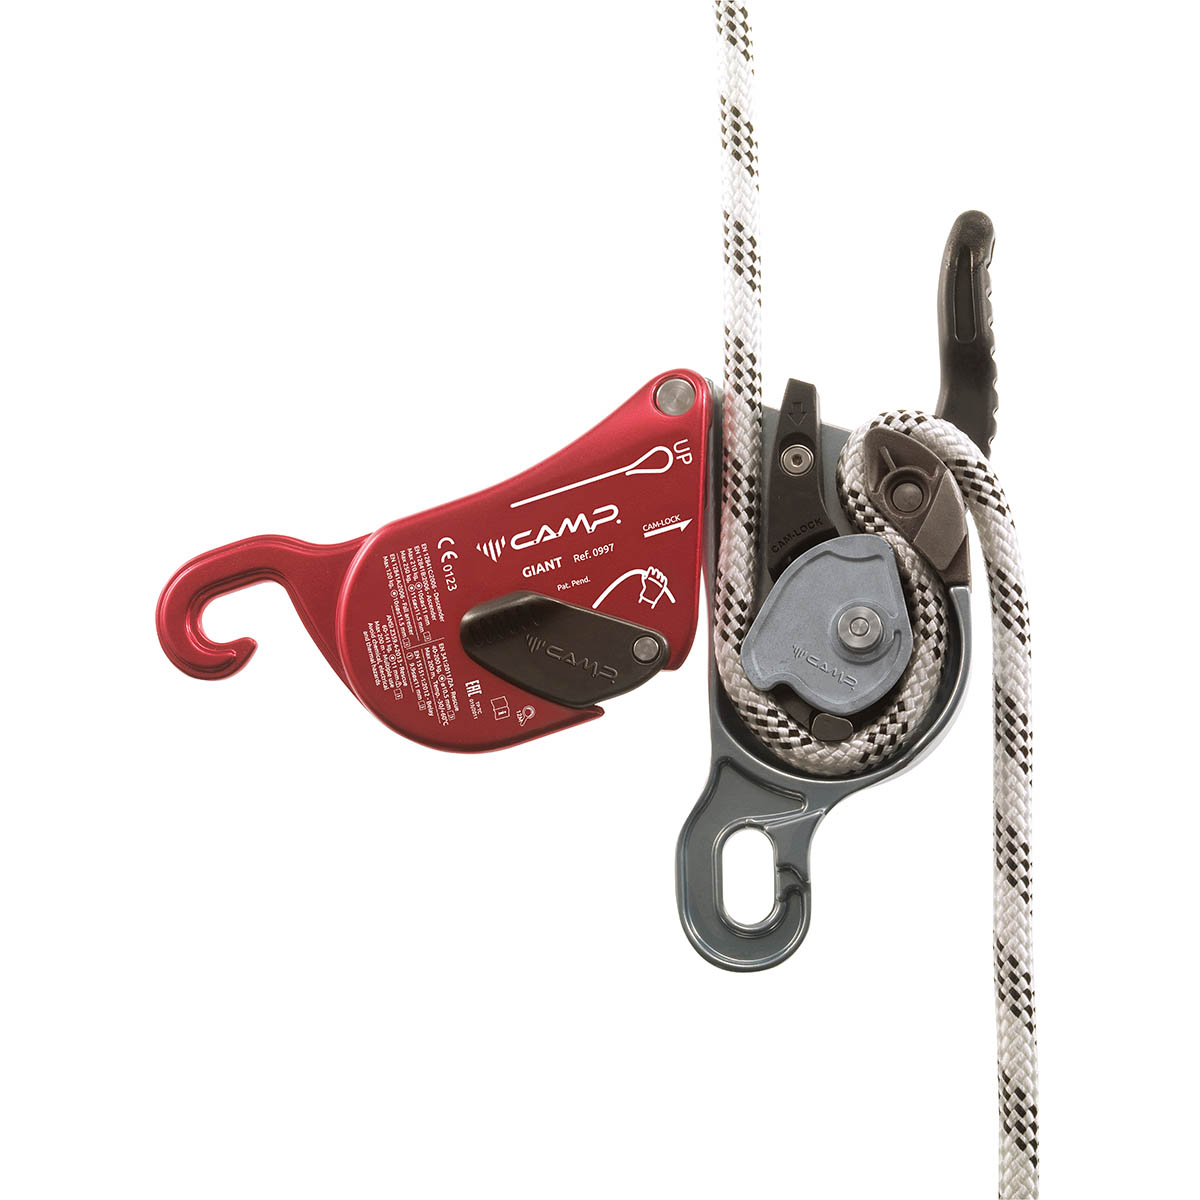 https://worknrescue.ca/wp-content/uploads/2019/01/campsafety-giant-multifunctional-descender-red-5.jpg